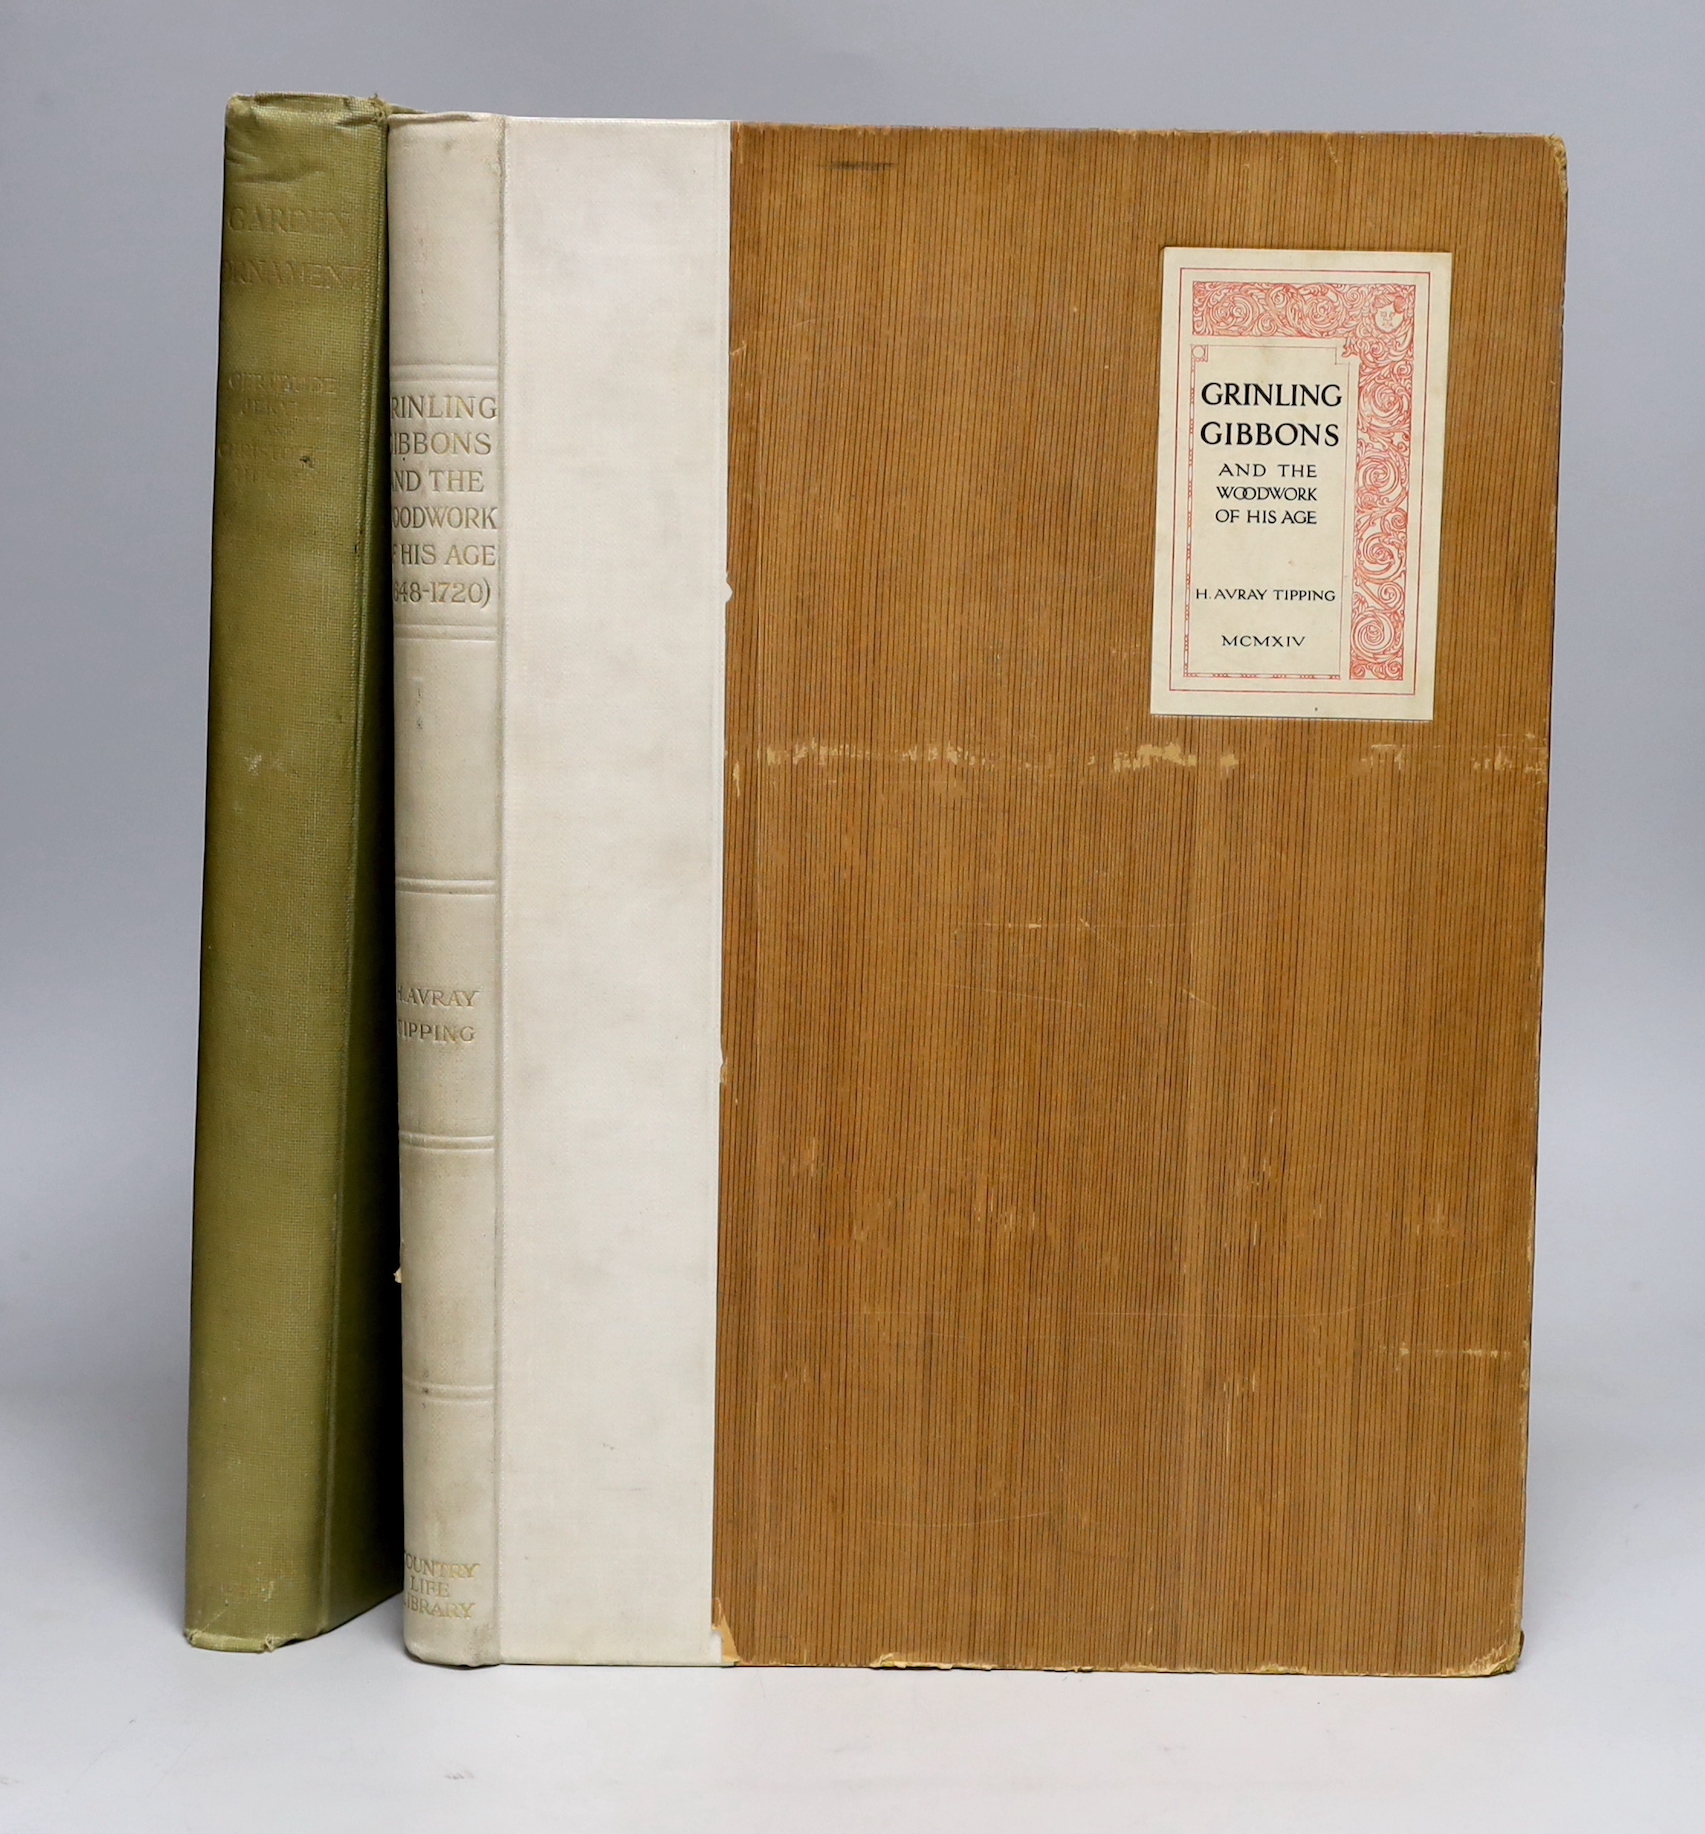 Jekyll, G and Hussey, C - Garden Ornament, second edition, original cloth, 1927 and Tipping, H.A – Grinling Gibbons, original cloth-backed boards, 1914, (2)